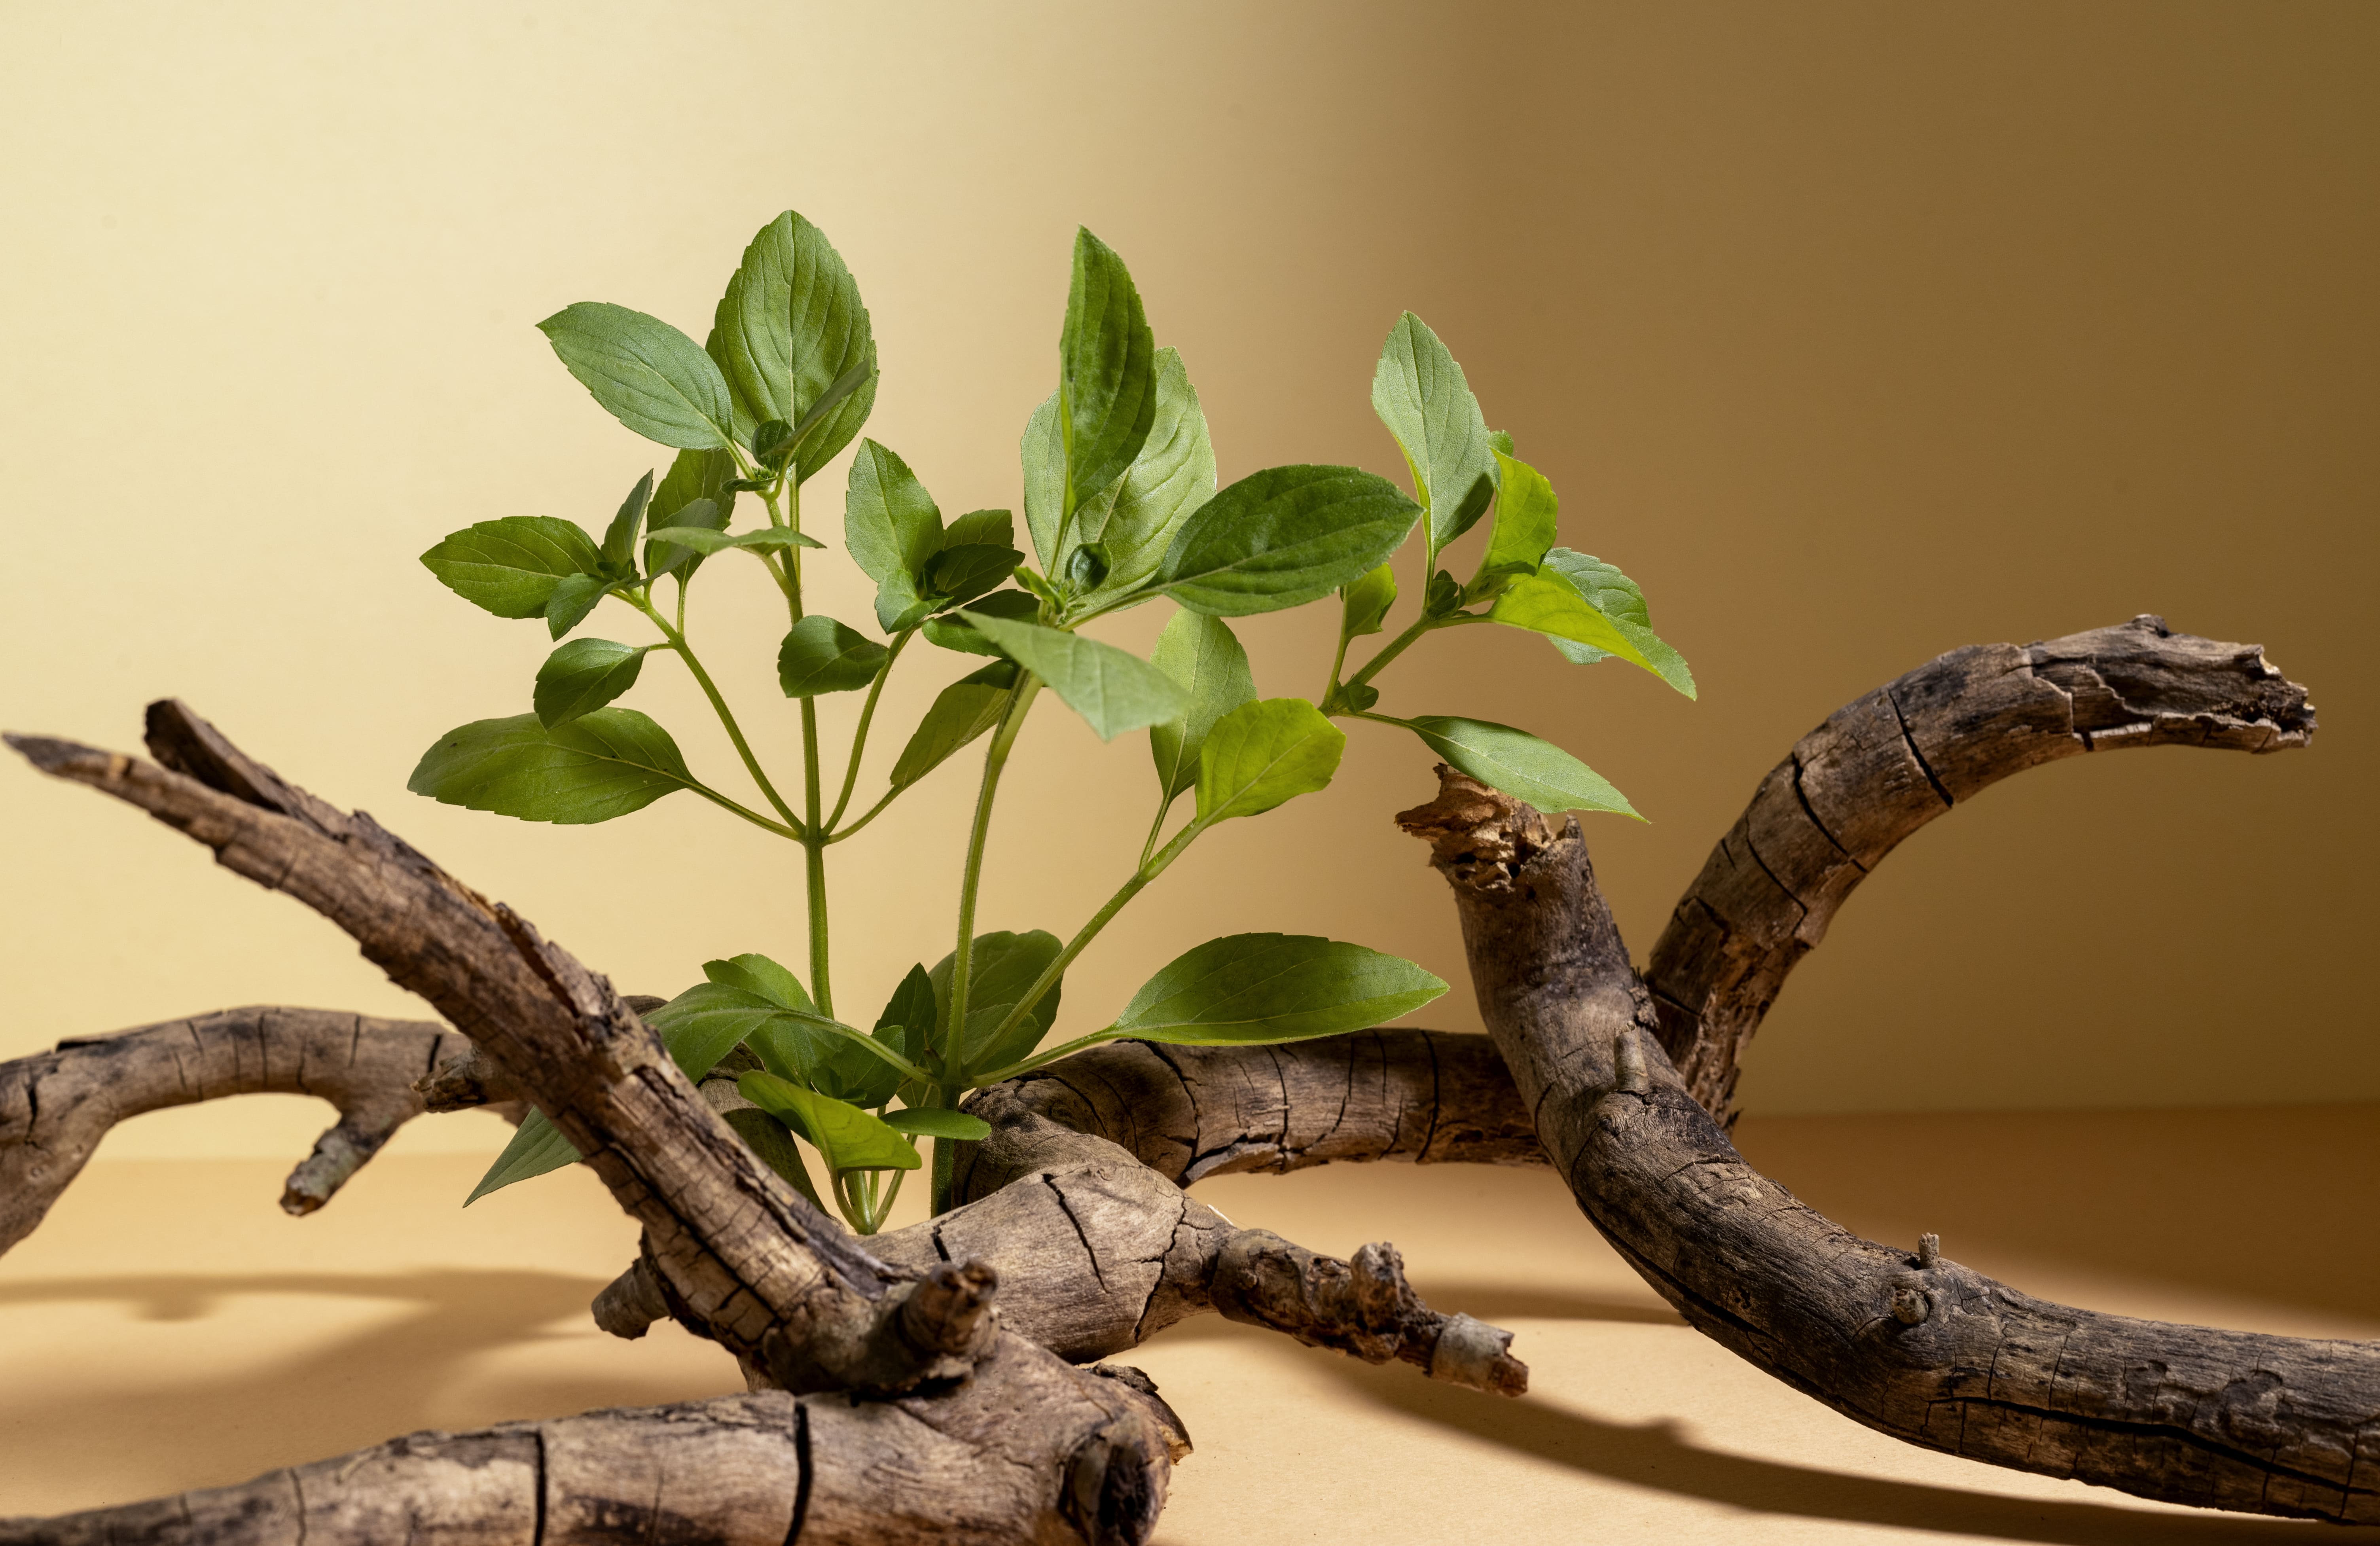 Ashwagandha Roots product suppliers in india, Herbal Roots suppliers in india, Ashwagandha Roots suppliers in india, Aaditya Traders suppliers in India